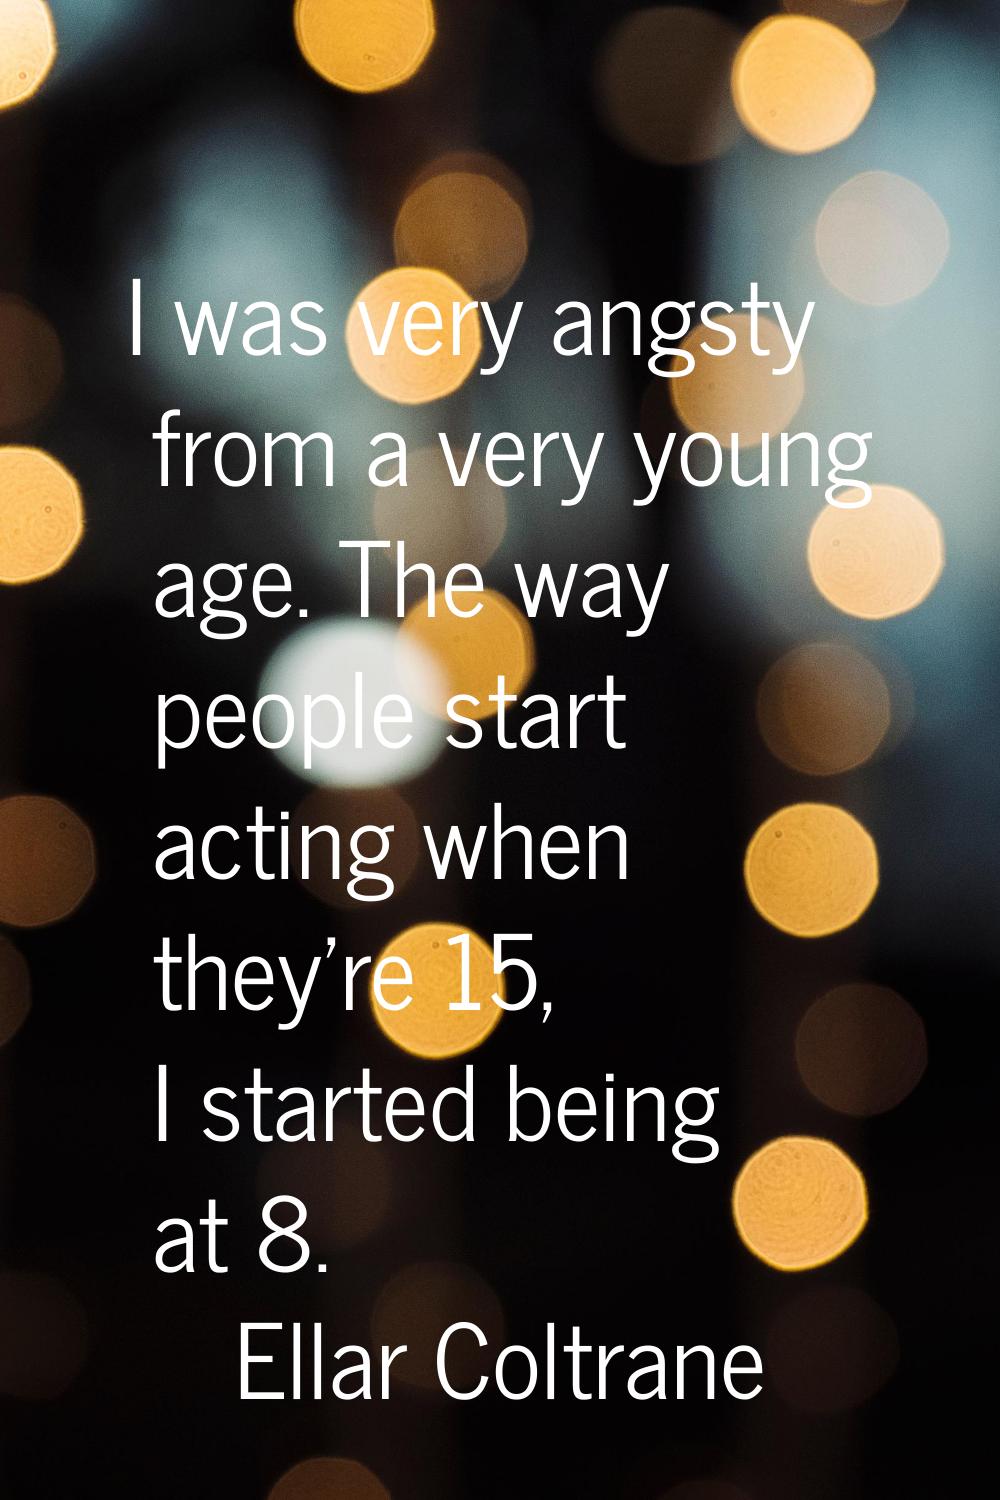 I was very angsty from a very young age. The way people start acting when they're 15, I started bei